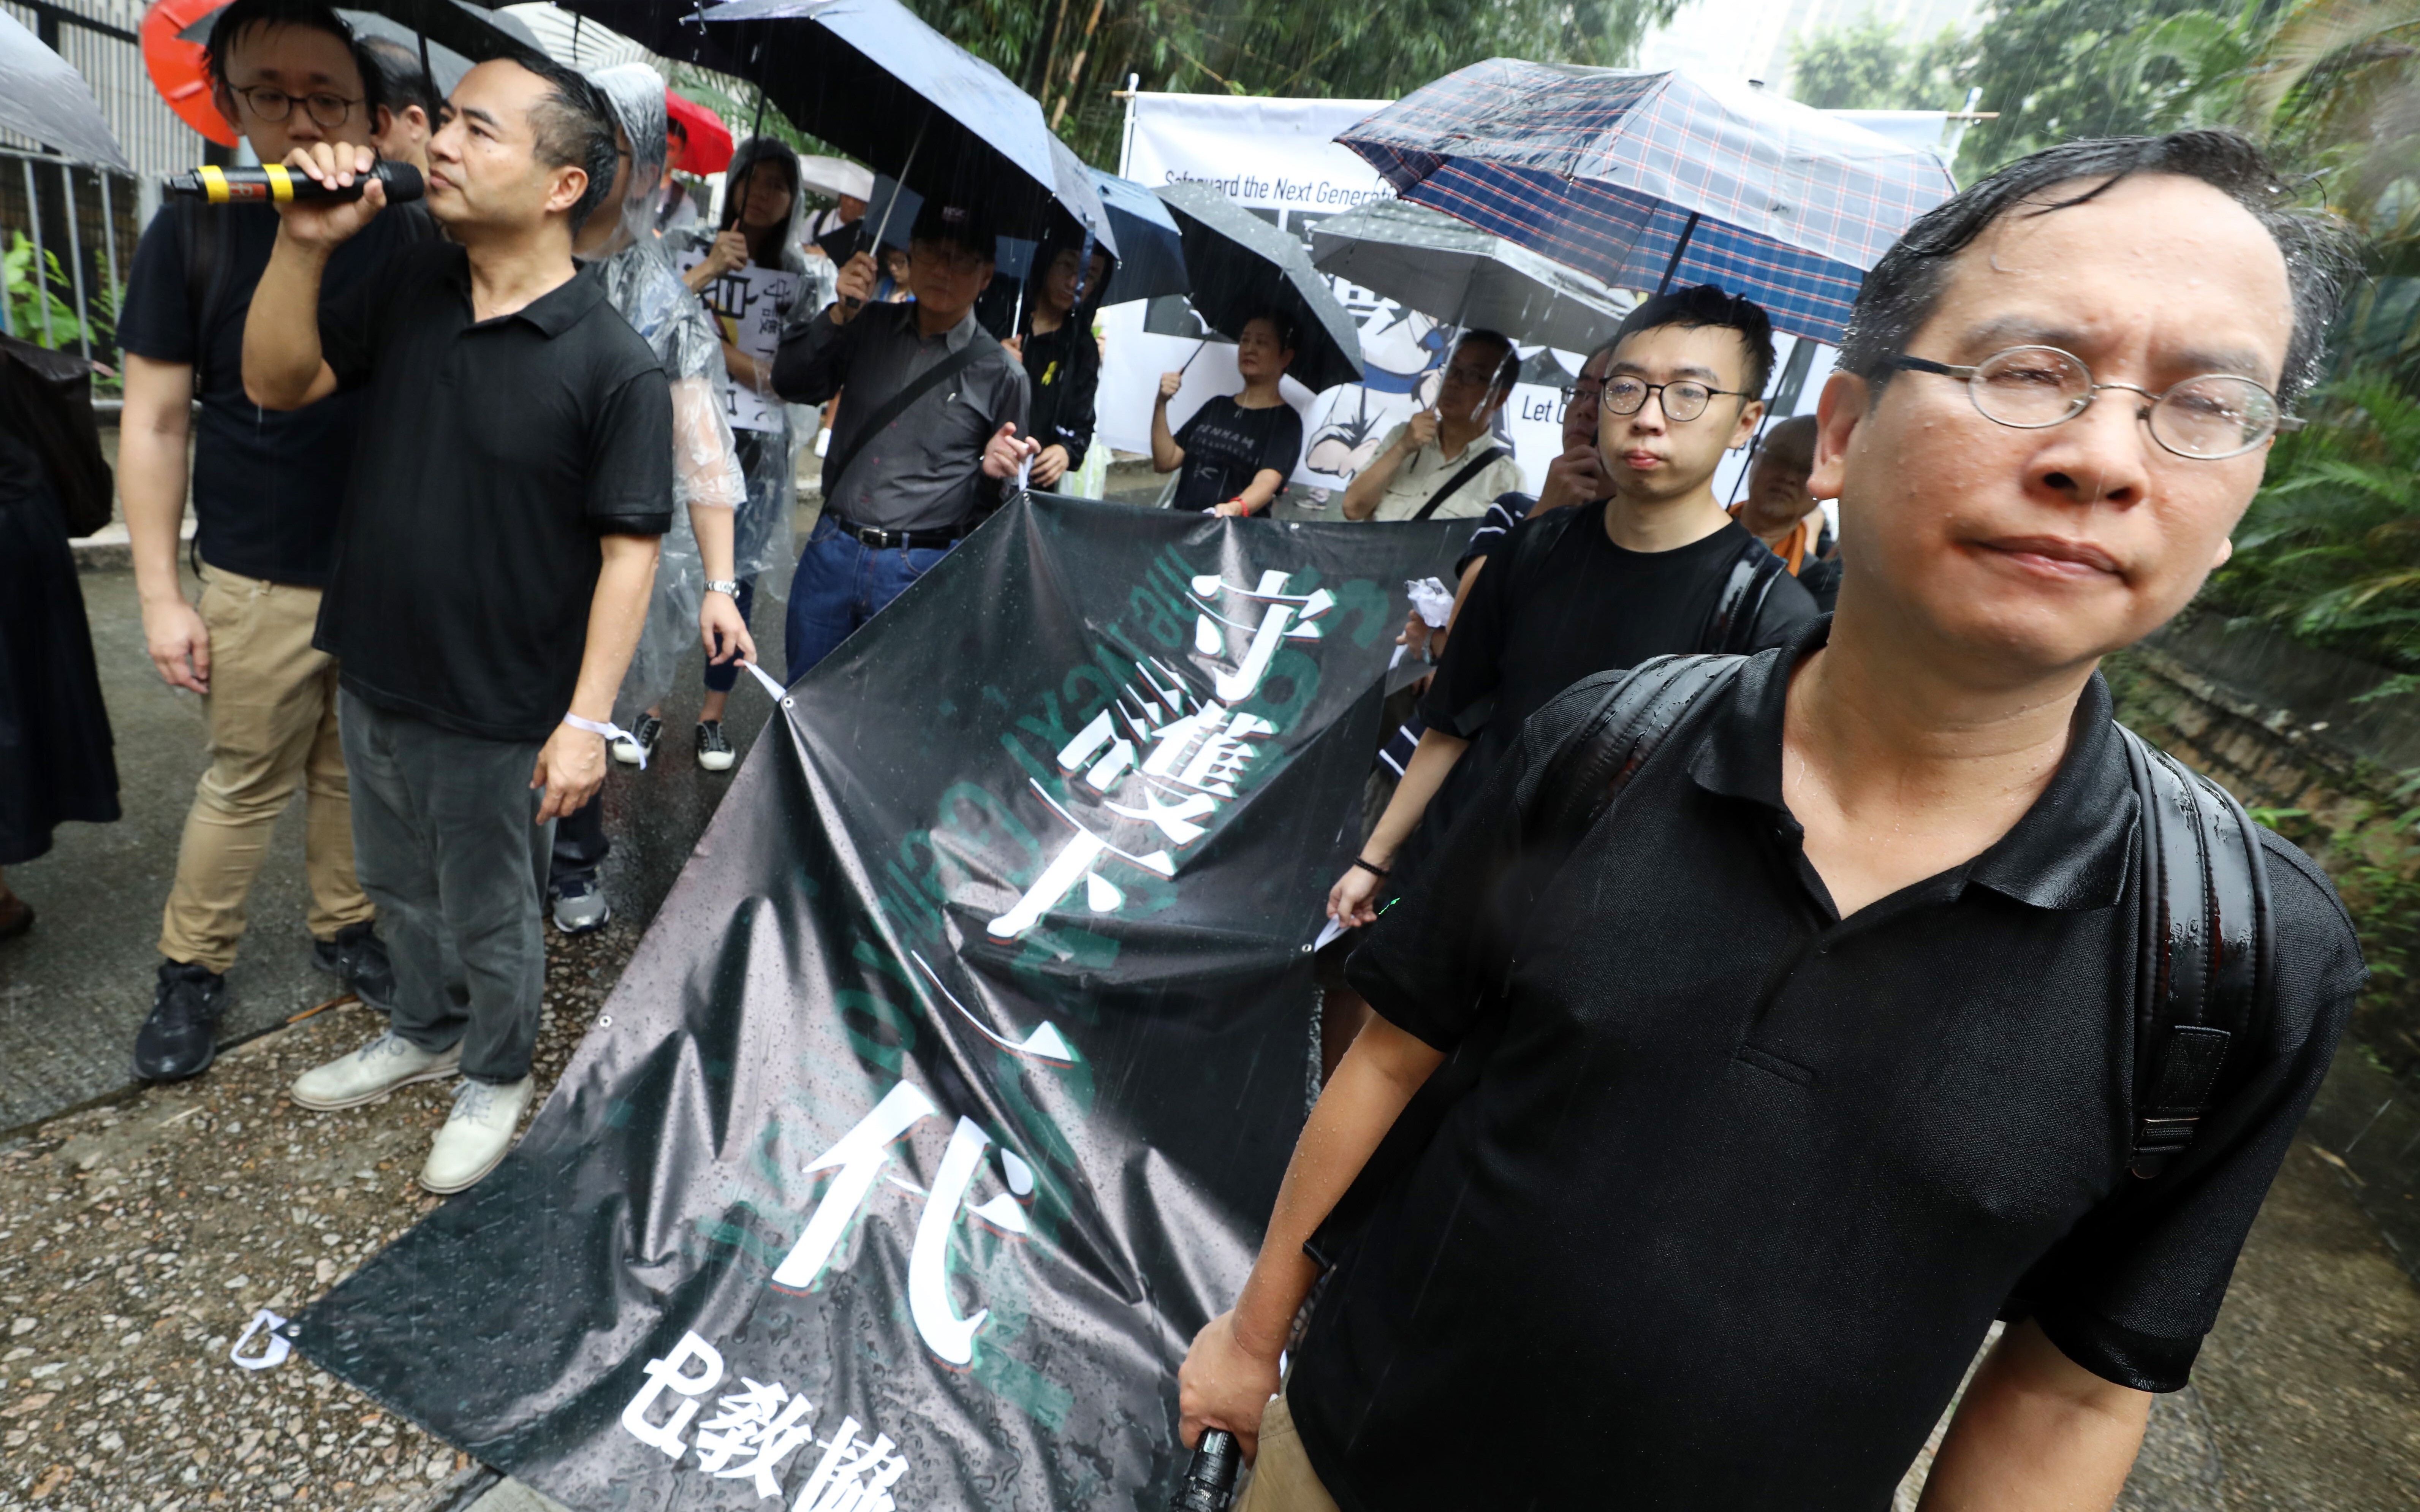 Hong Kong teachers and lawmakers rally for the withdrawal of a deeply unpopular extradition bill in August 2019. Photo: Dickson Lee